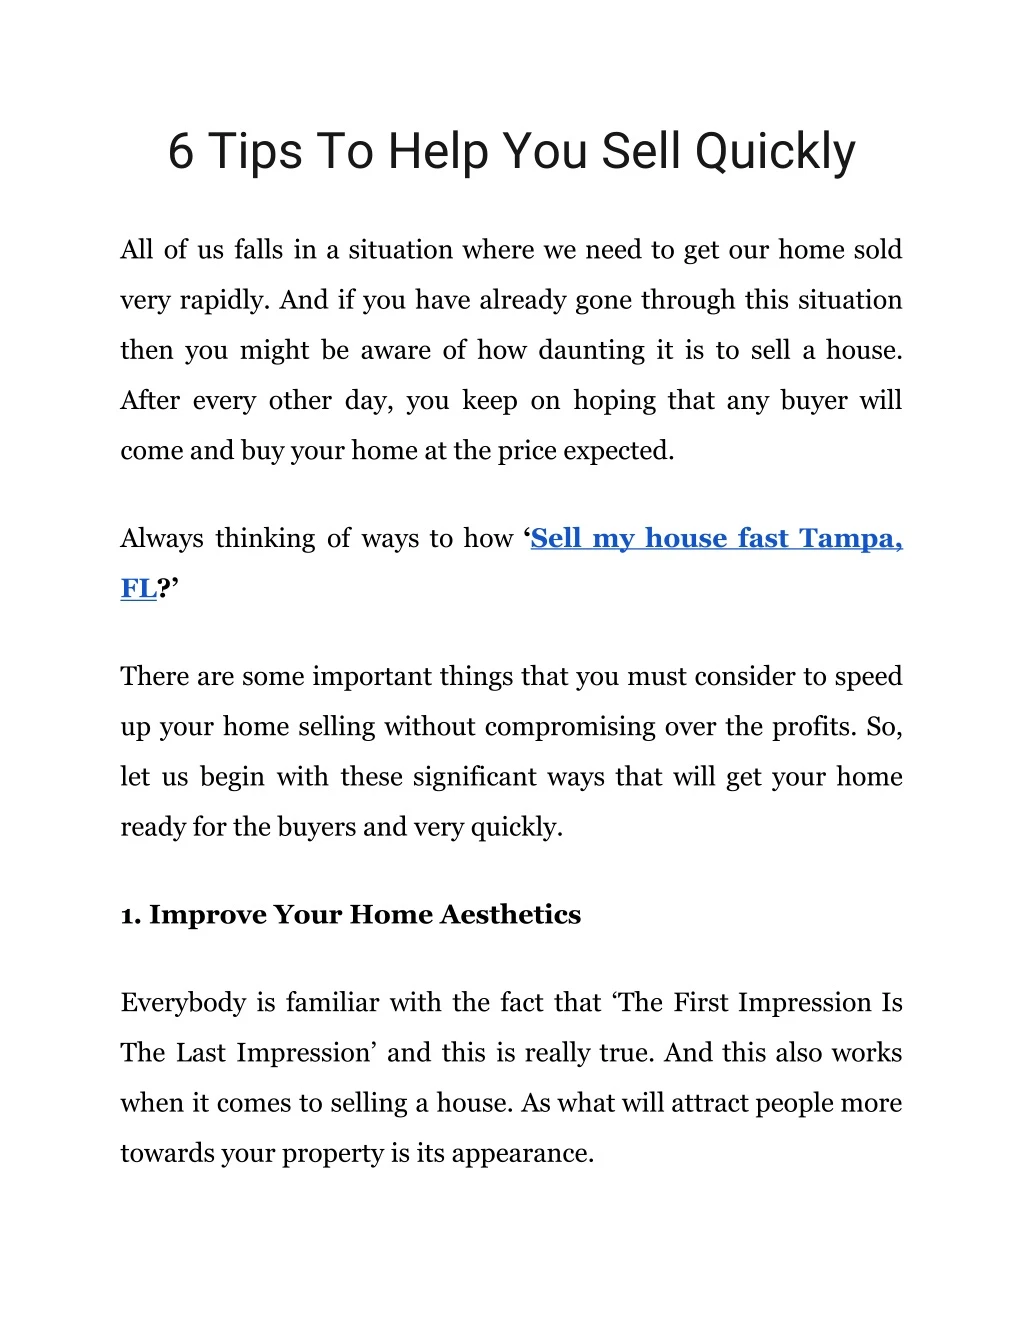 6 tips to help you sell quickly